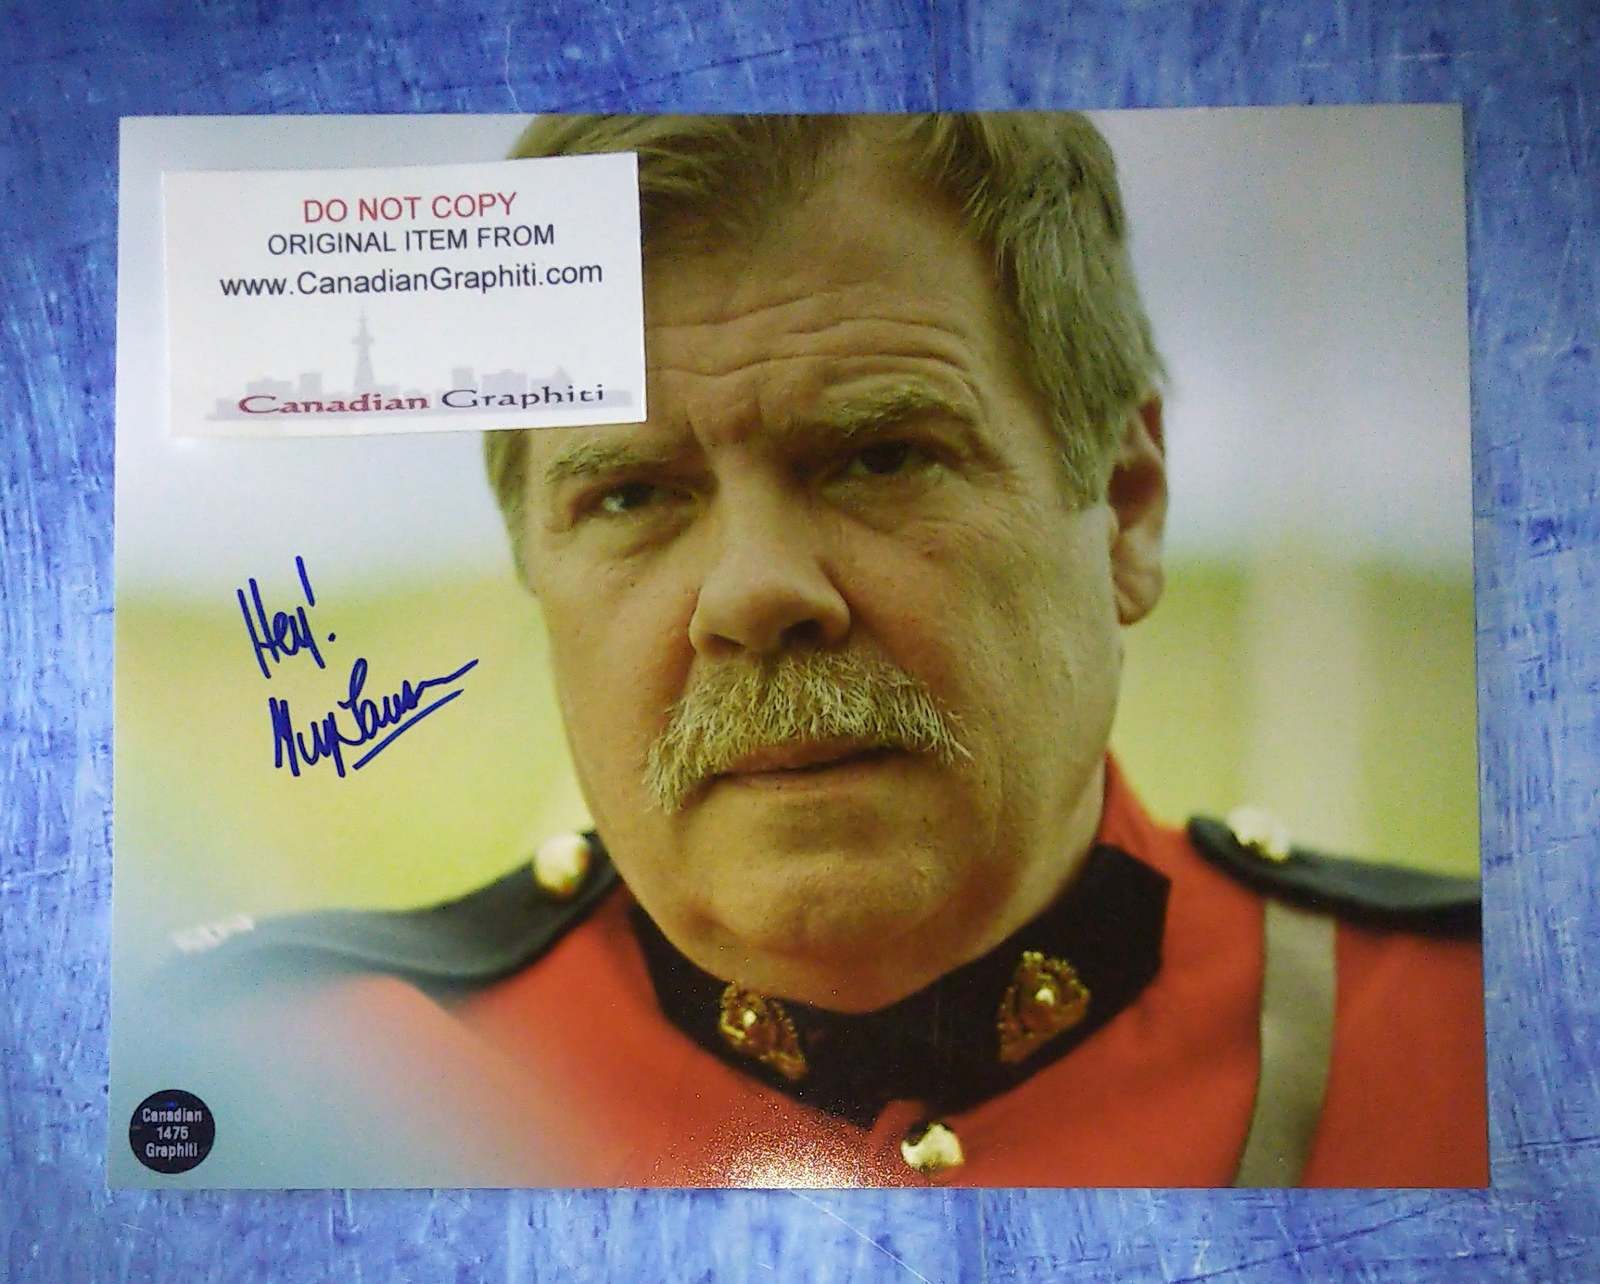 Primary image for Greg Lawson Hand Signed Autograph 8x10 Photo Wynonna Earp